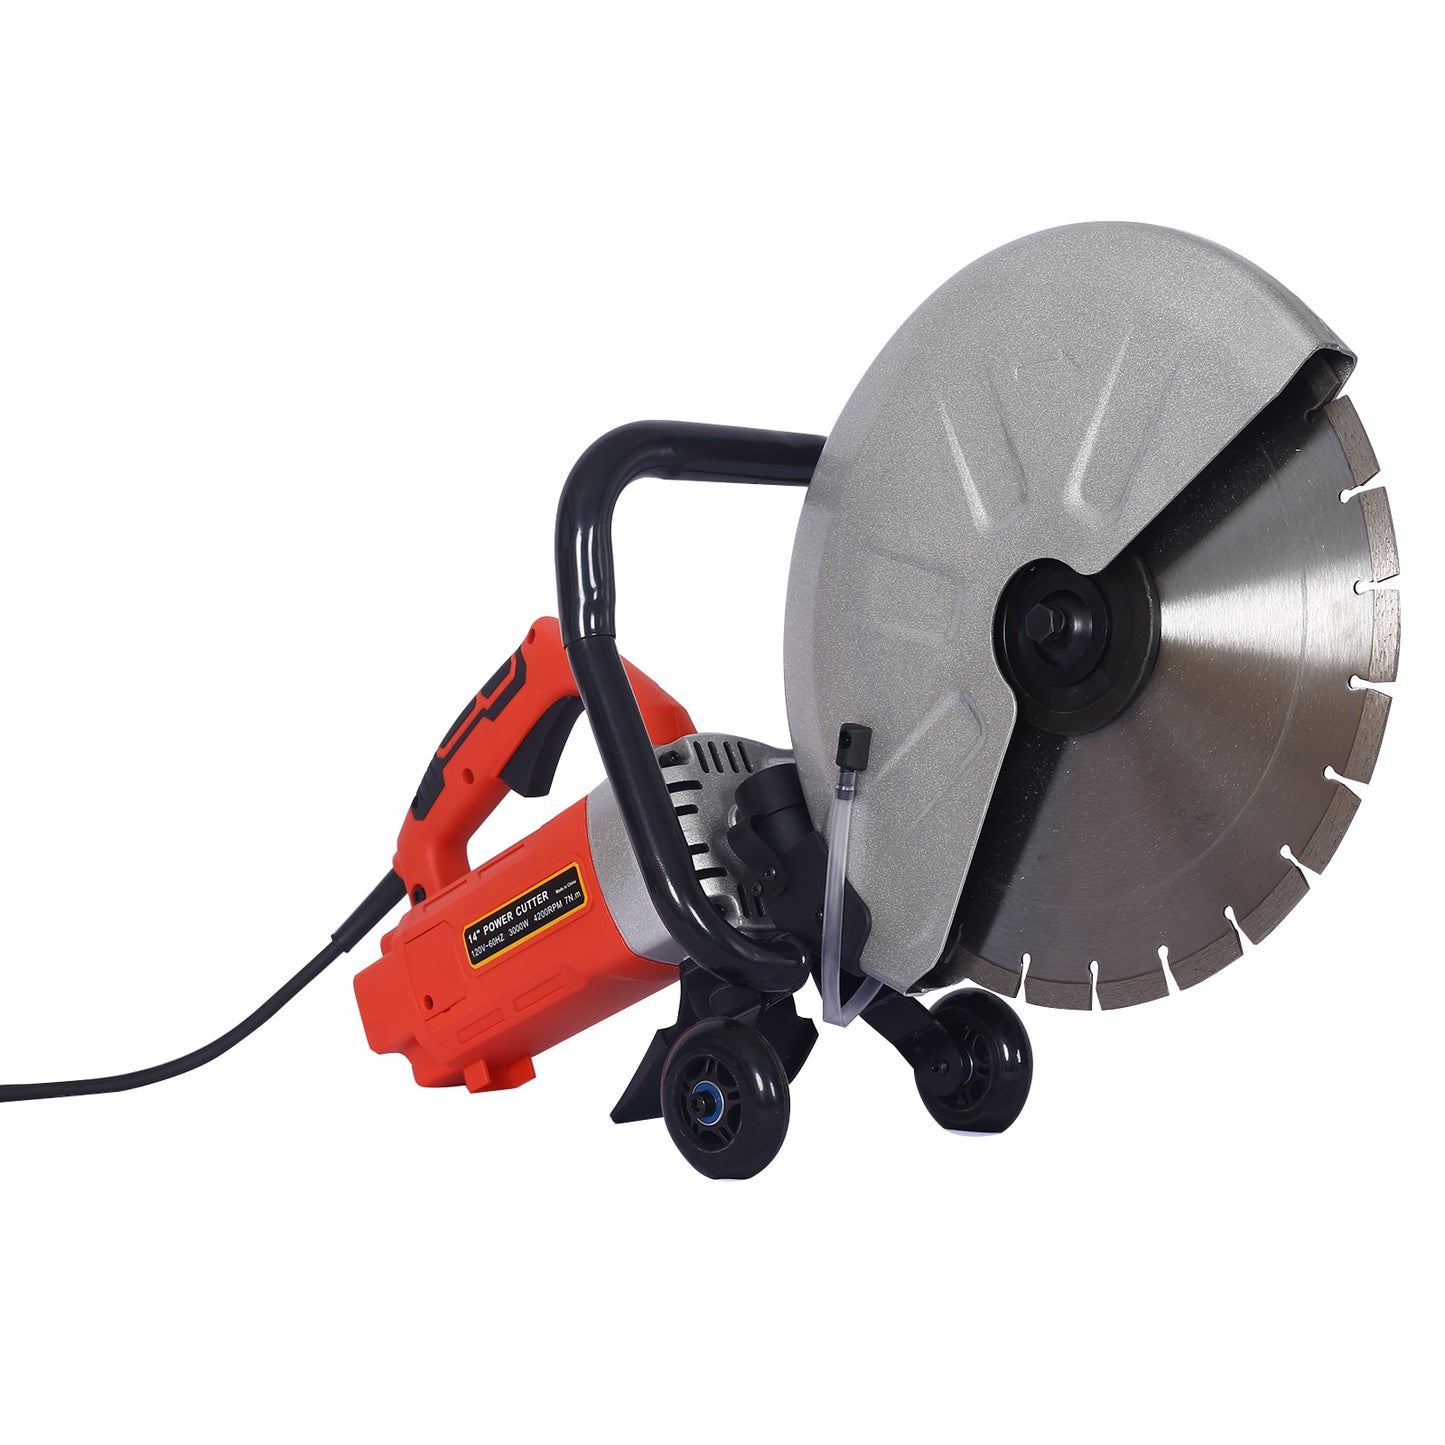 Electric 14" Cut Off Saw Wet/Dry Concrete Saw Cutter Guide Roller with Water Line Attachment 3000w with blade